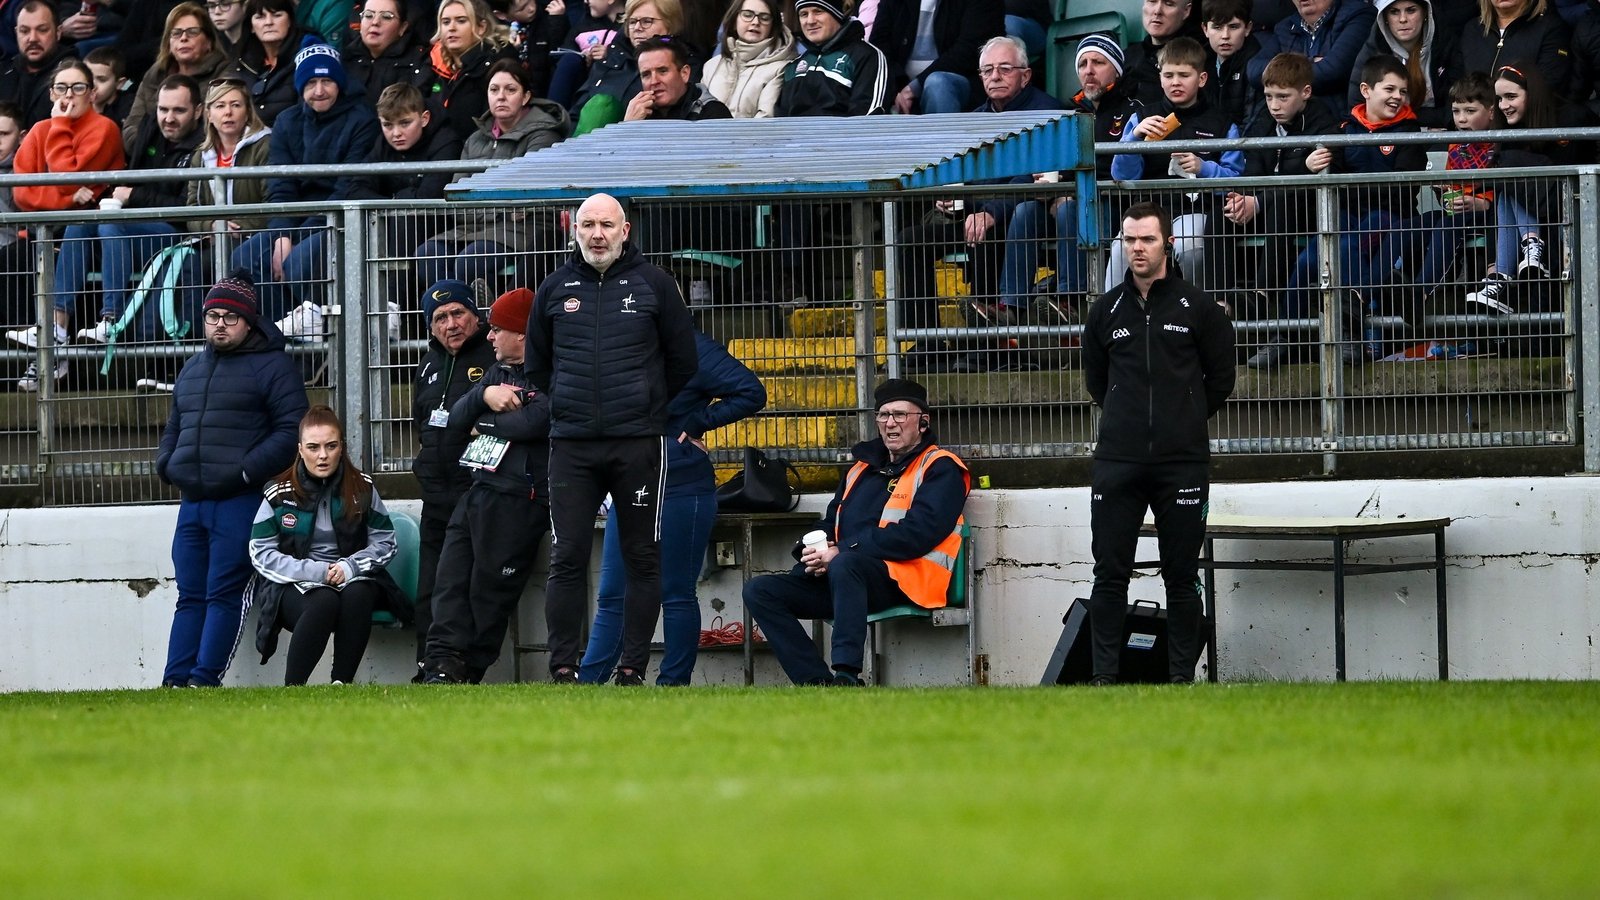 Whelan: Something is not right in Kildare